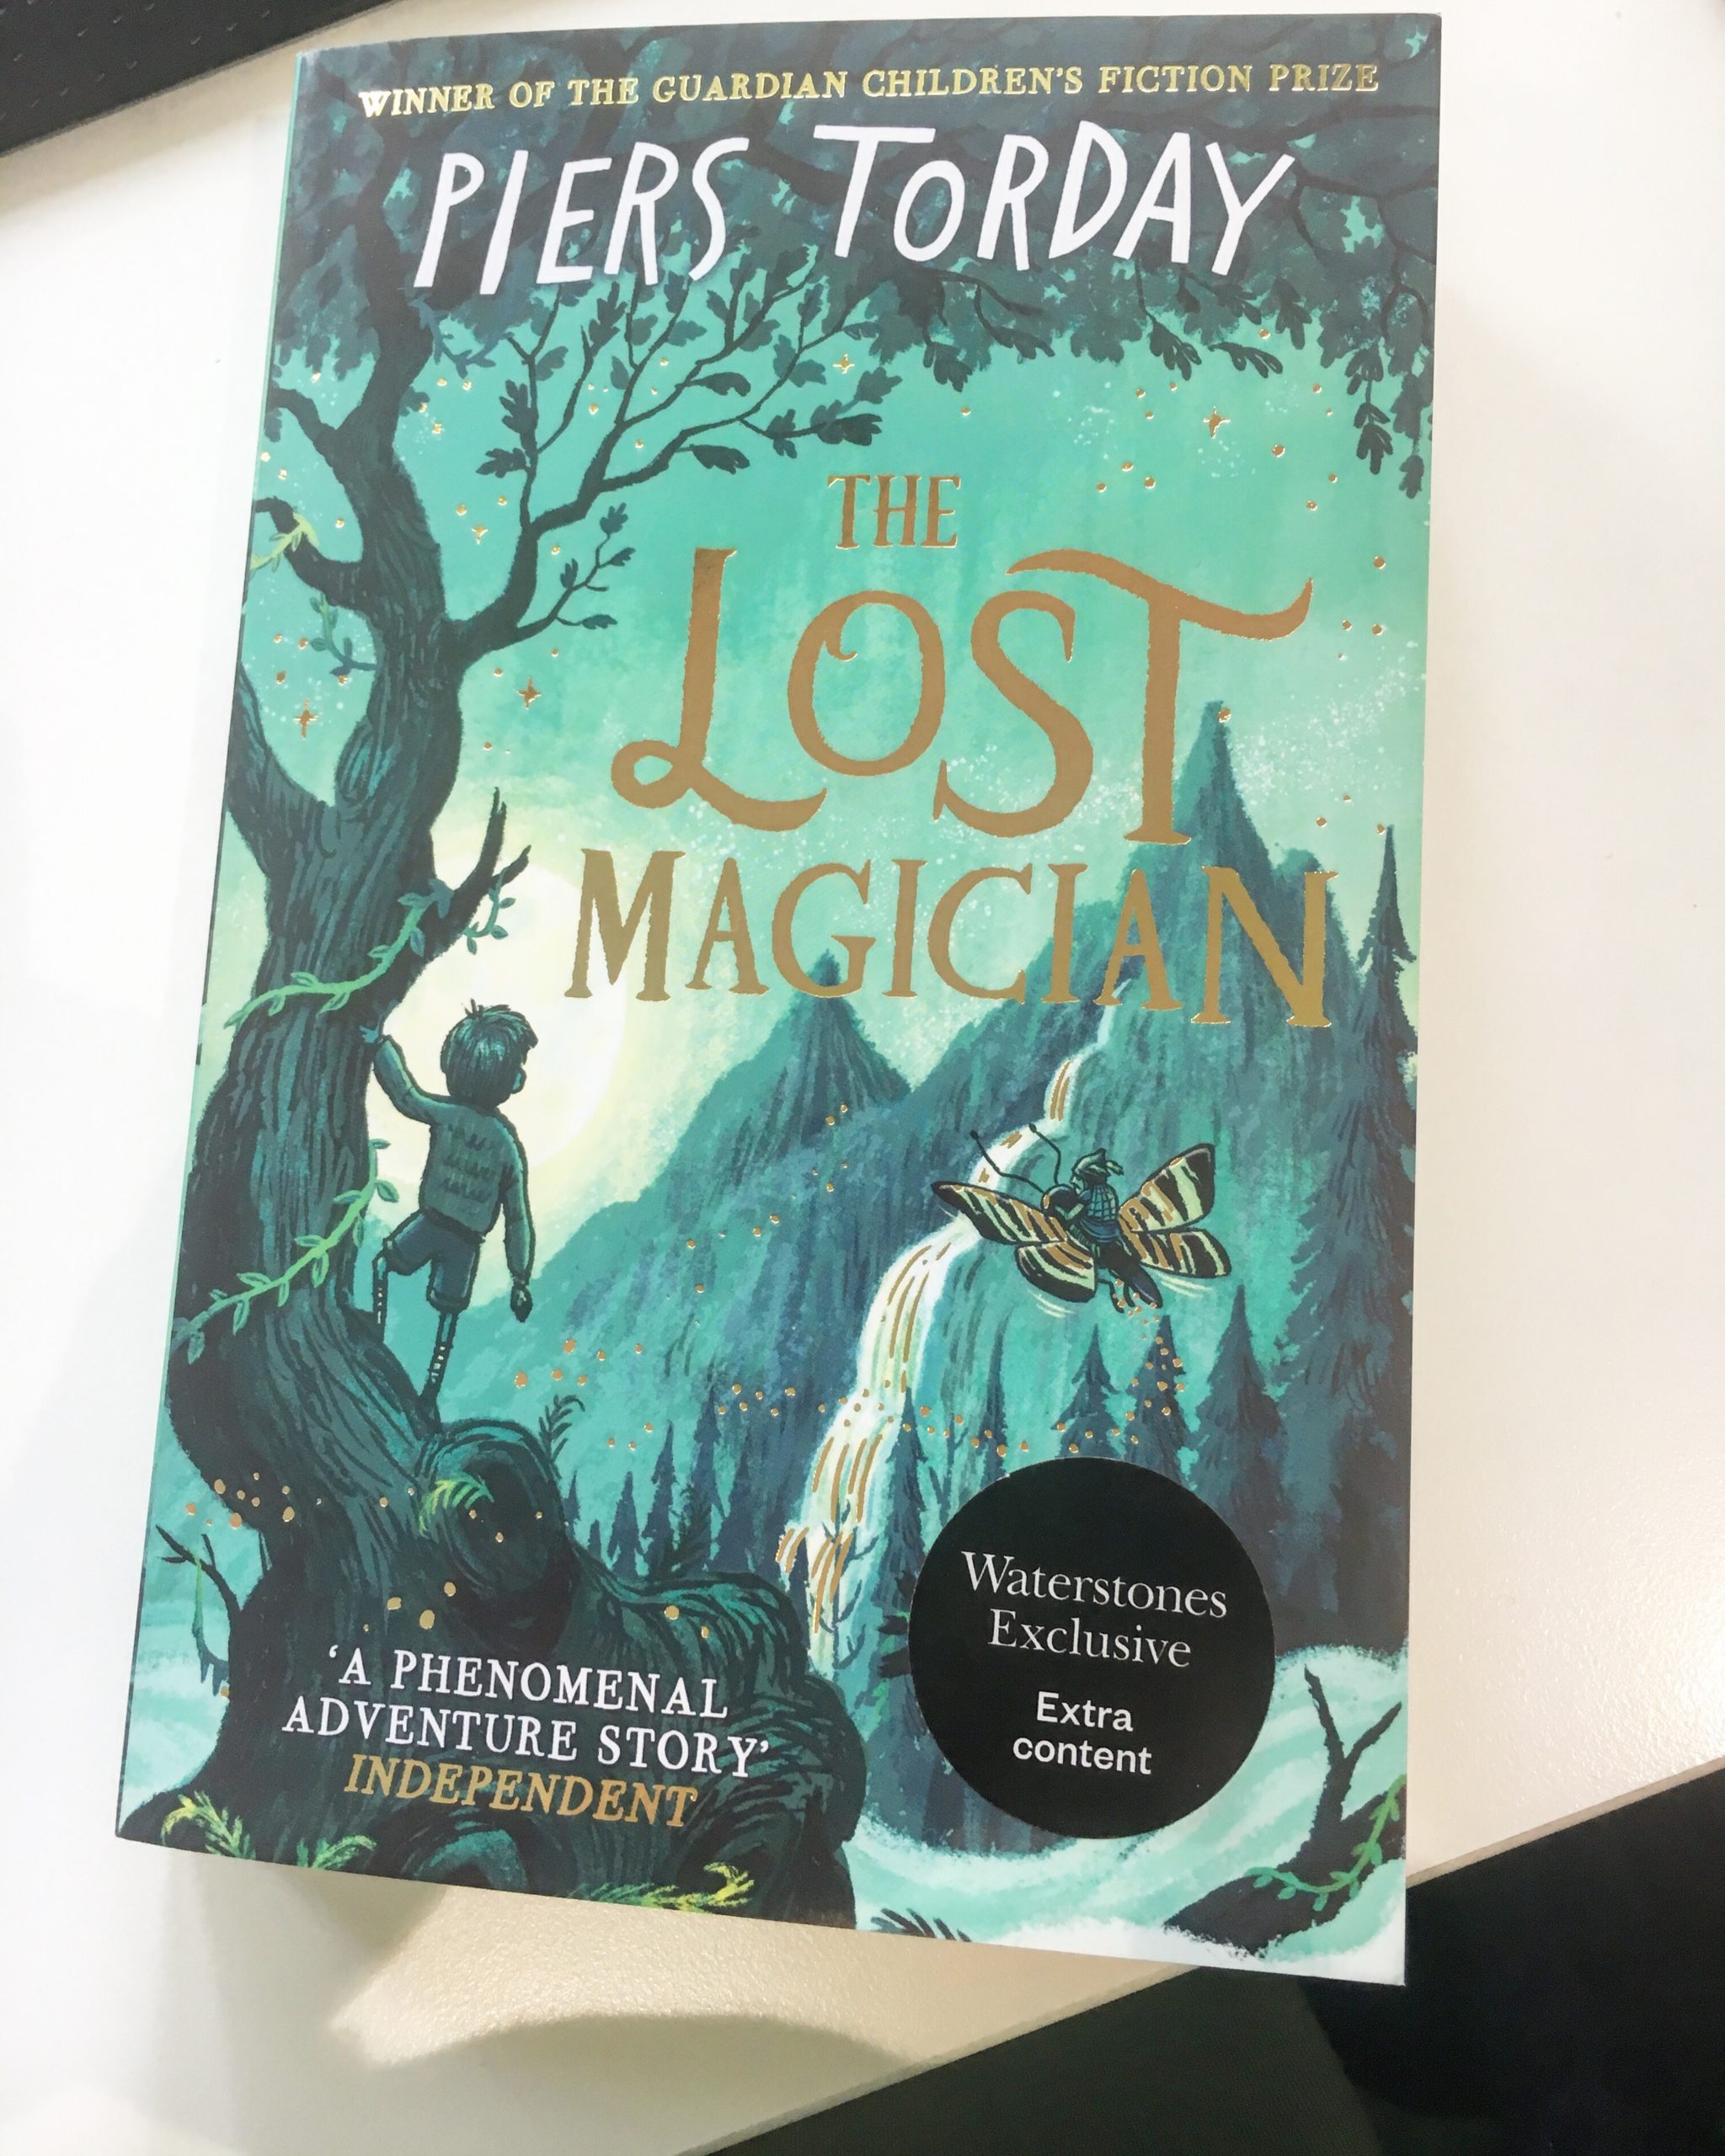 Book review – The Lost Magician